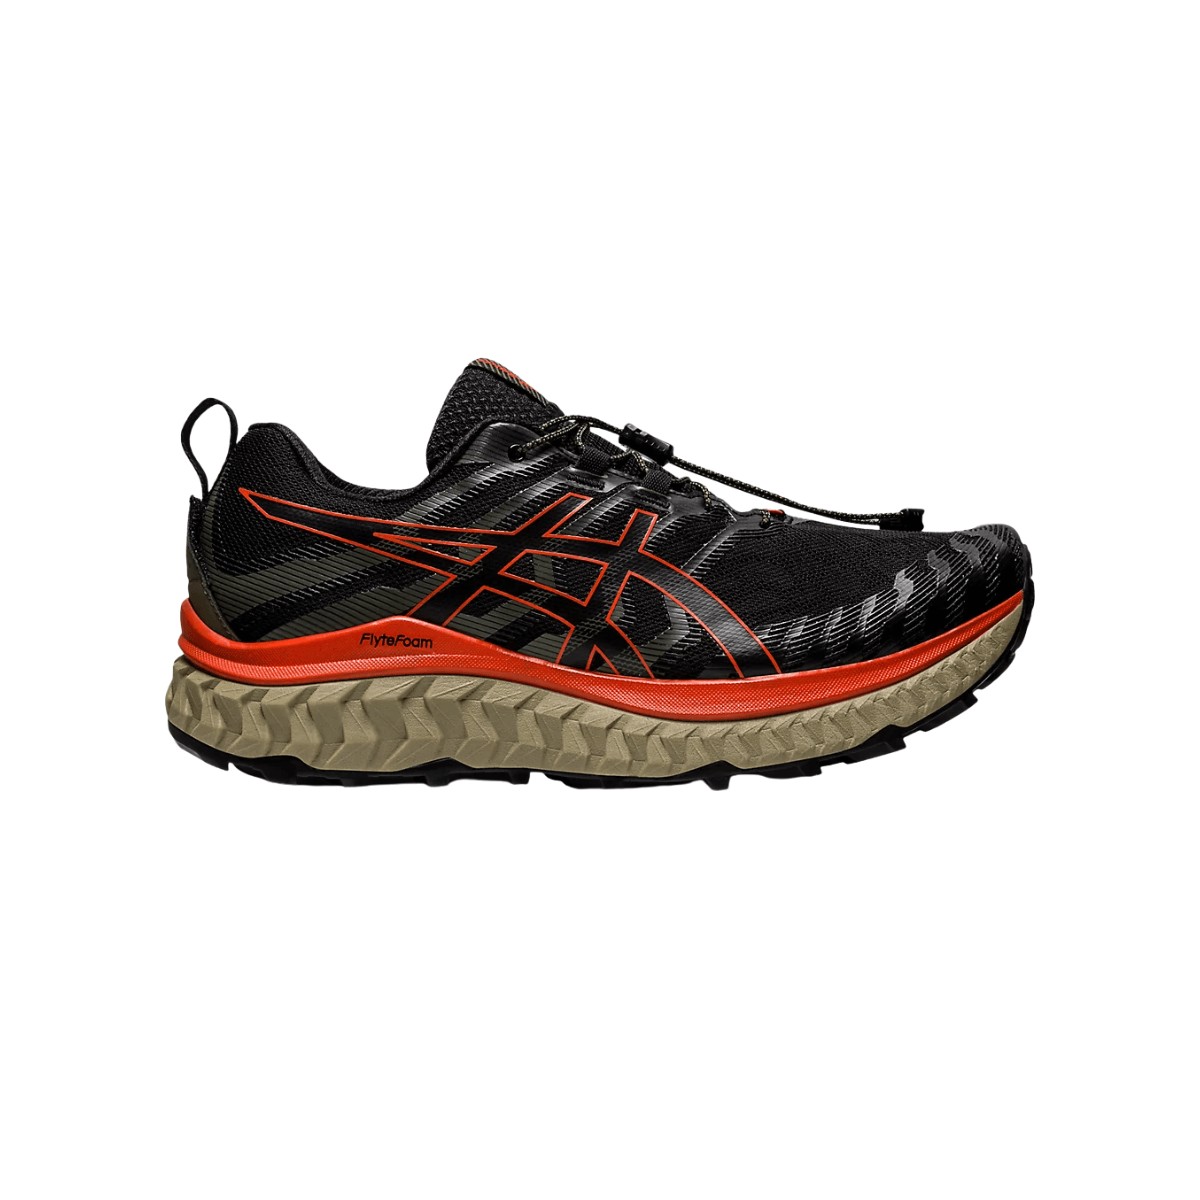 Chaussures Asics Trabuco Max Noir Rouge AW22, Taille 42 - EUR